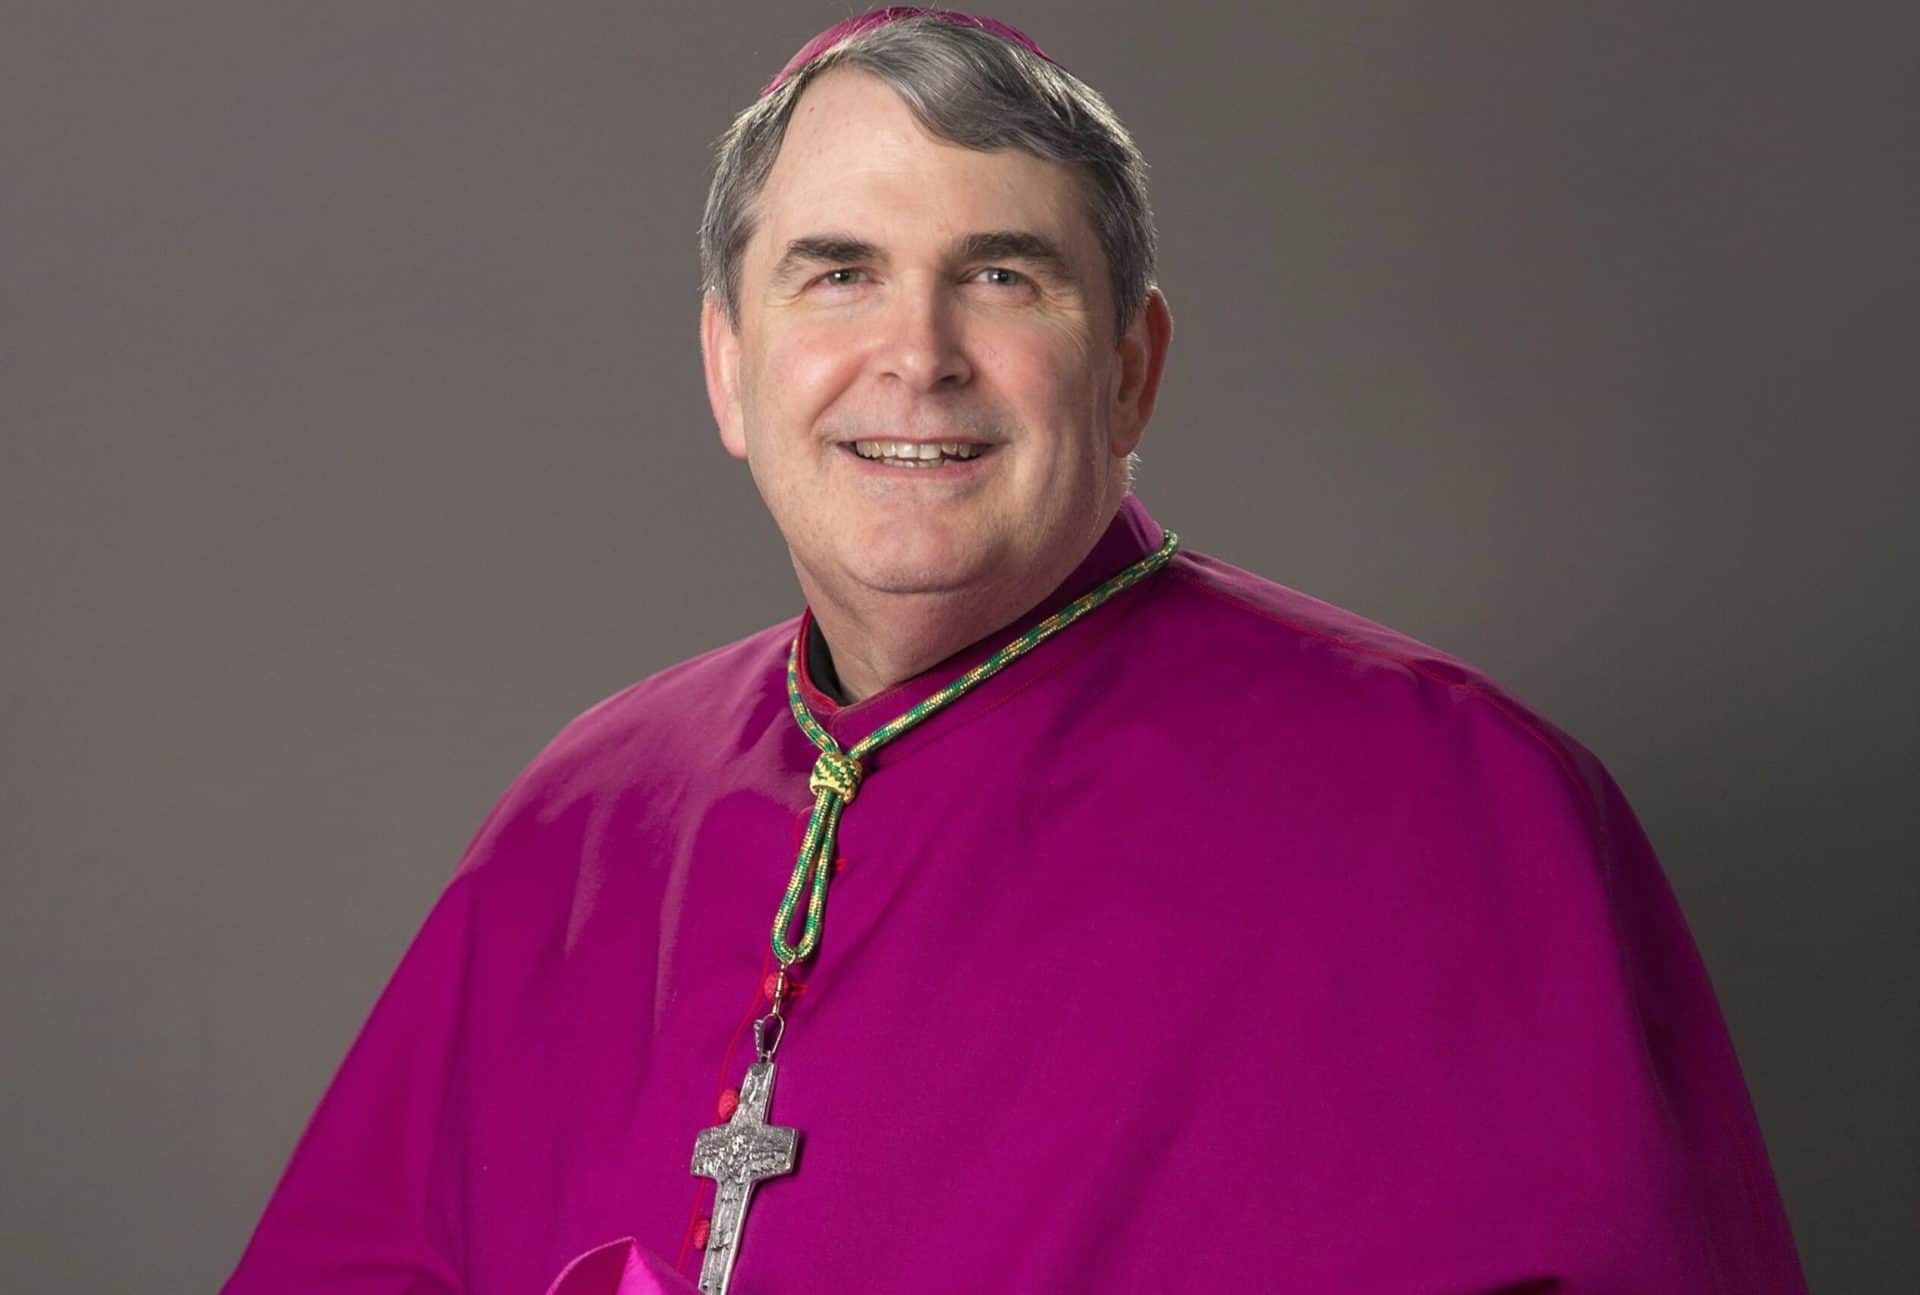 Bishop Michael W. Fisher of the Diocese of Buffalo, N.Y., a graduate of CAPP and Catholic University's Catholic social teaching course 